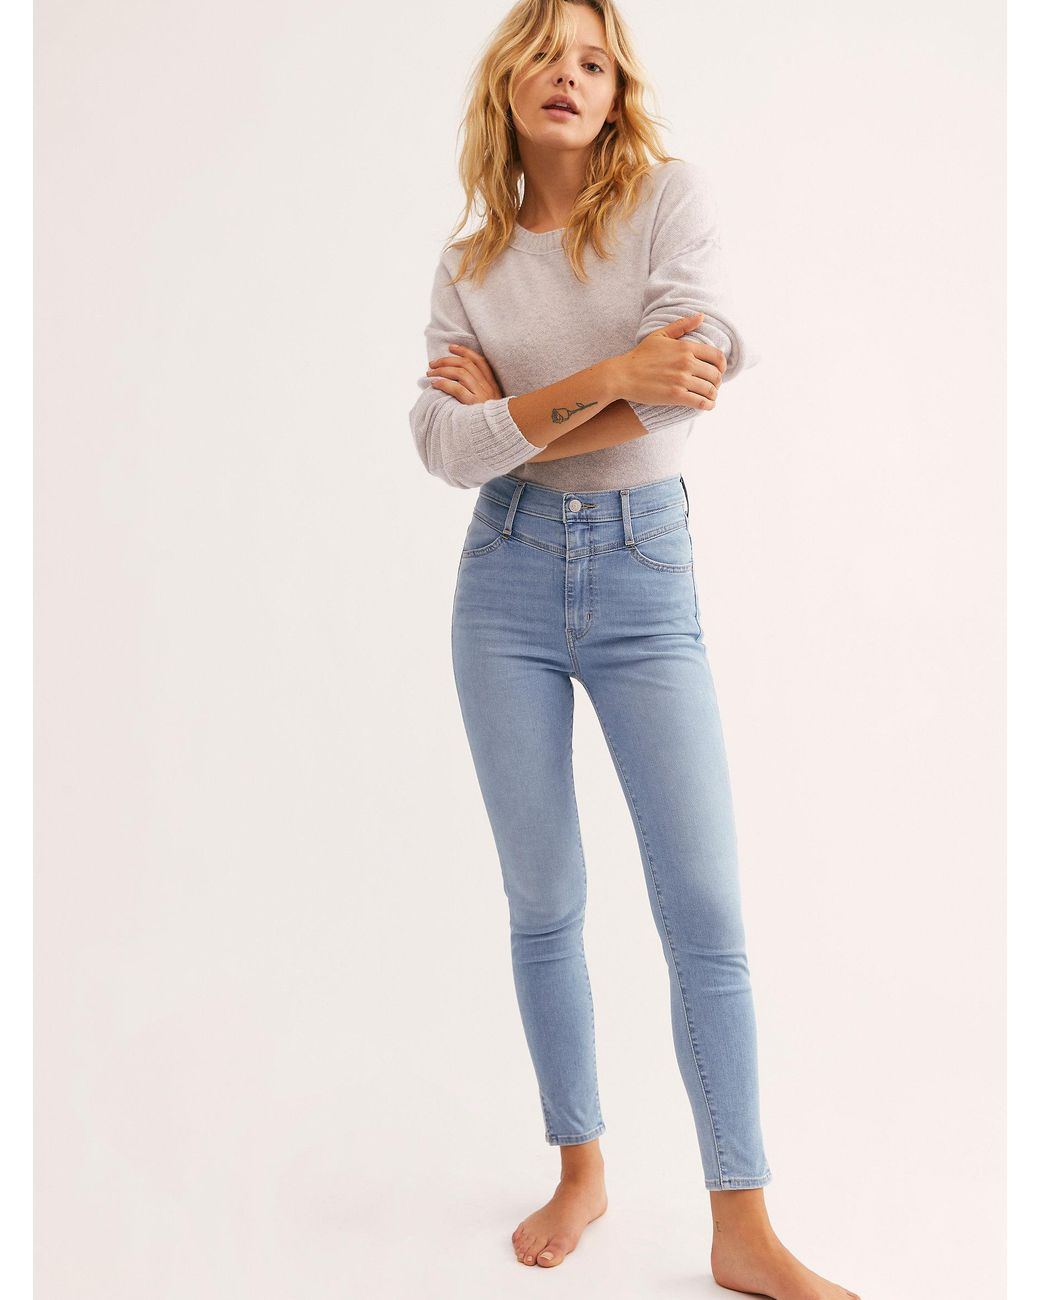 Free People Levi's Mile High Ankle Booty Jeans in Blue | Lyst Canada